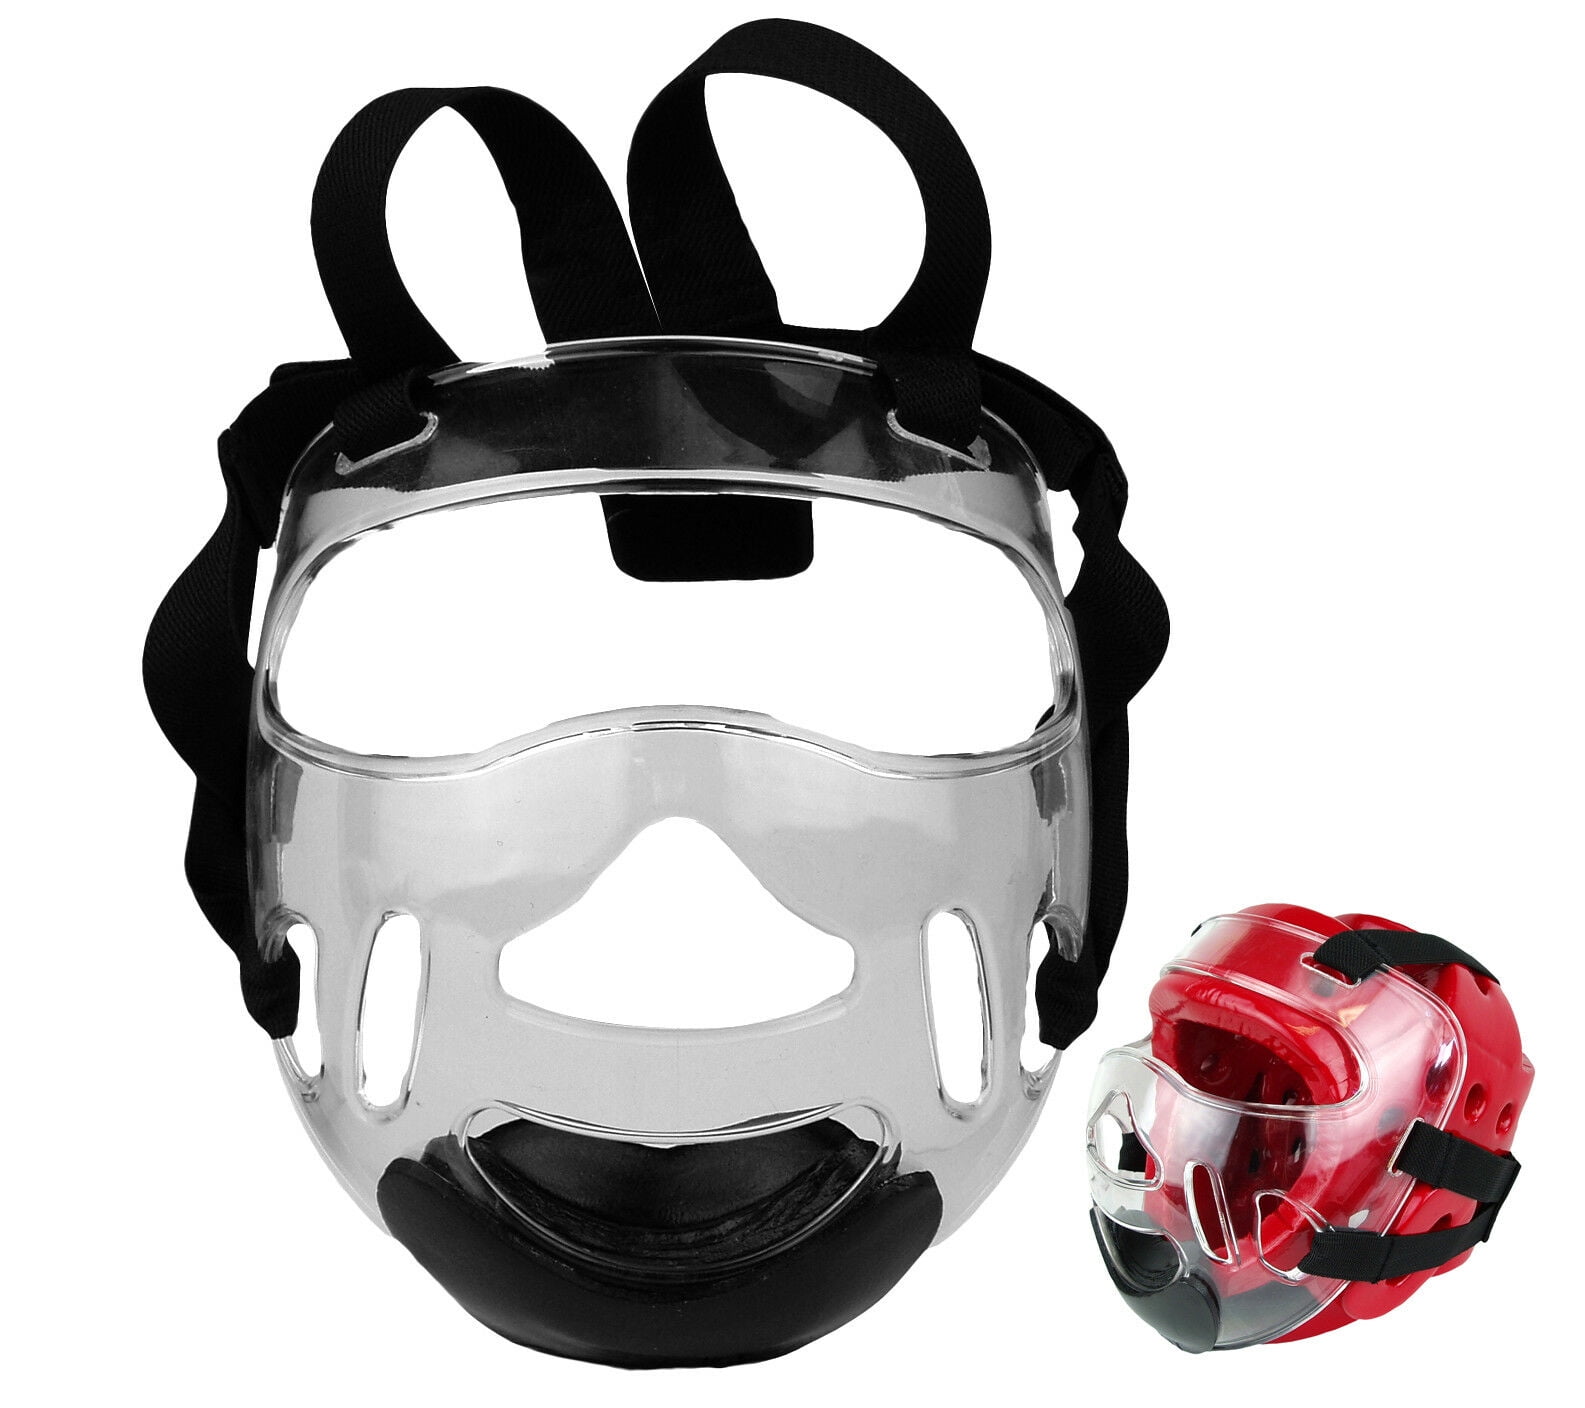 Details about   MMA Clear Face Shield Head Gear Black Mask Guard Sparring Hook & Loop Closures 